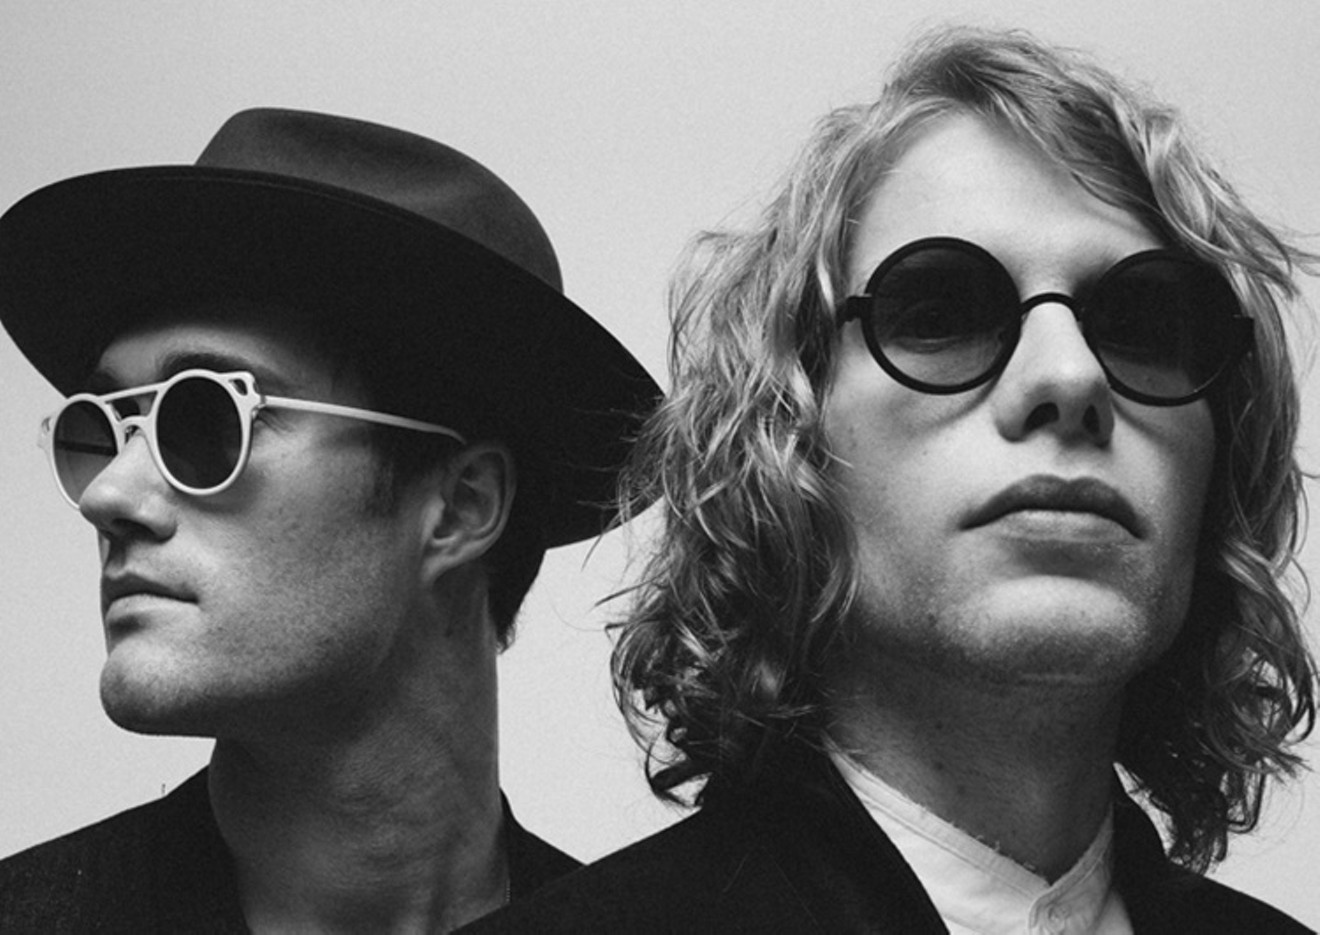 Bob Moses is scheduled to perform on Thursday, October 25, at The Van Buren.